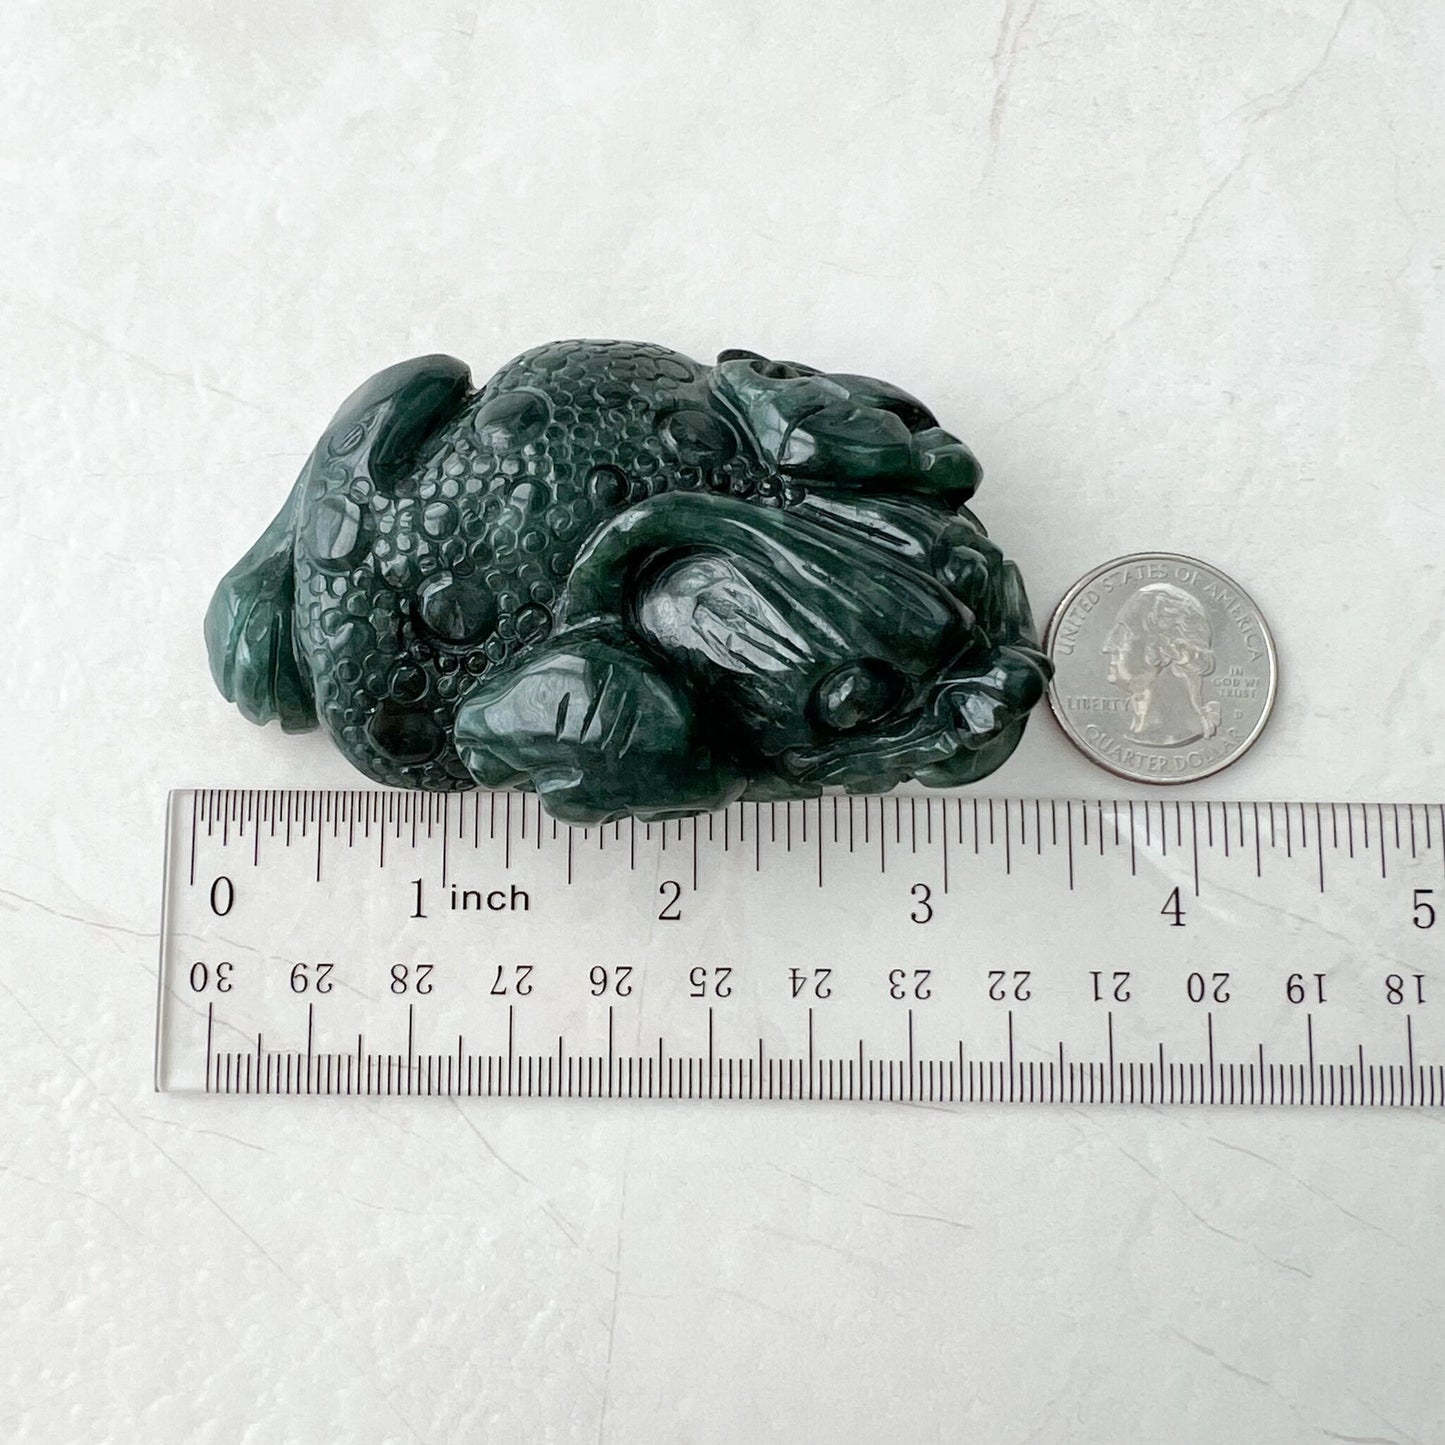 Jadeite Jade Blue-Green Money Toad, Money Frog, Golden Toad, 3 Leg Toad, Jin Chan, Lucky Toad, Feng Shui Carved Figurine, YJ-1221-0013828 - AriaDesignCollection